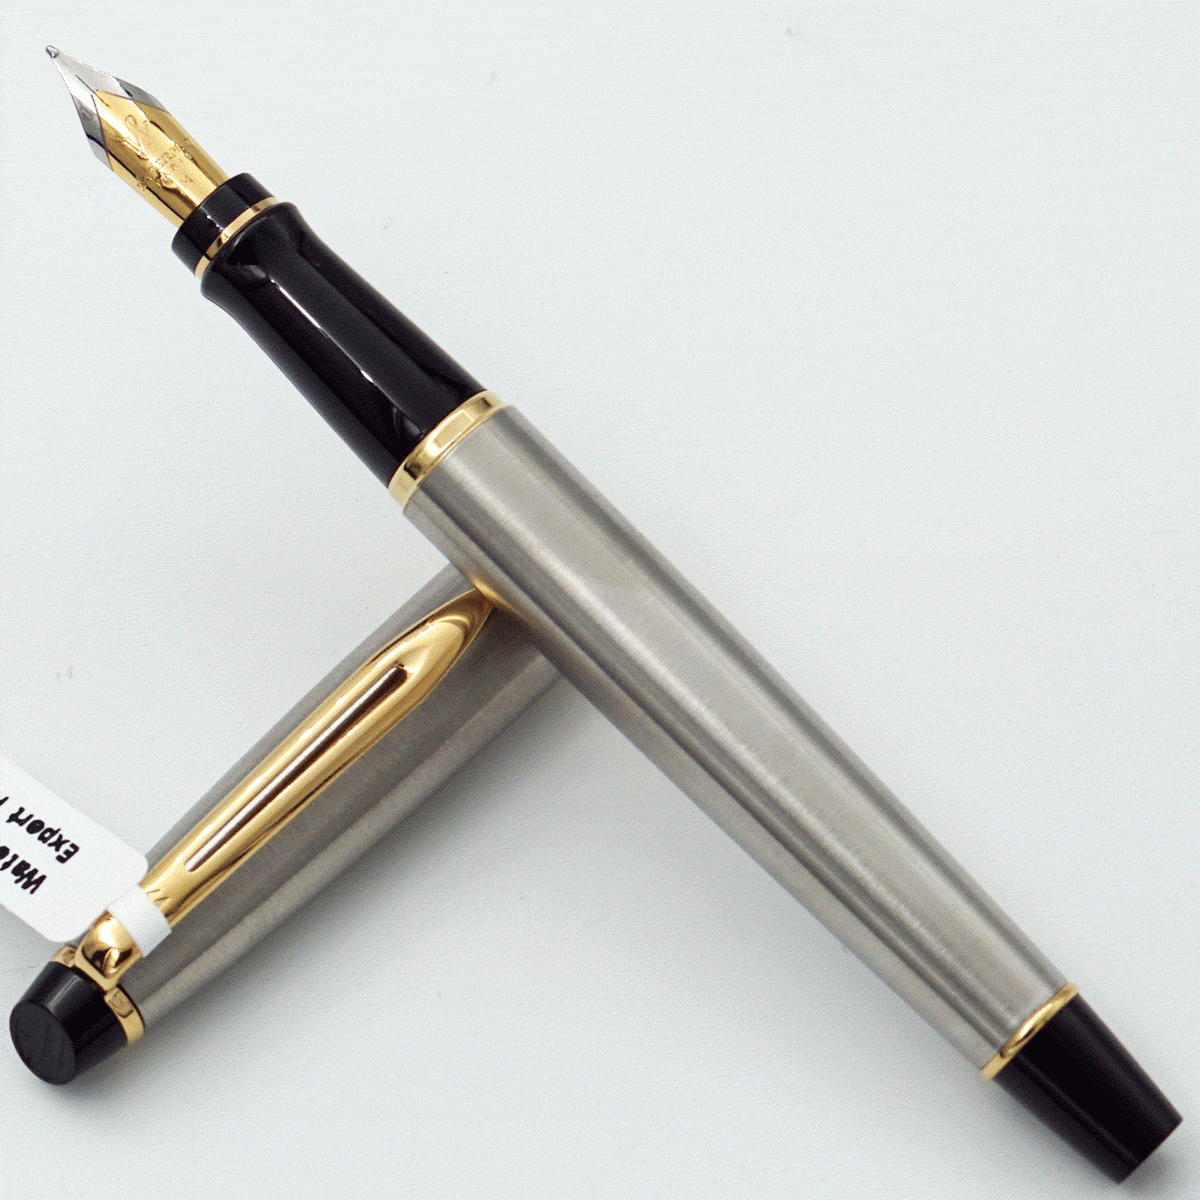 Waterman Expert Stainless Steel Body With Gold Trims And Golden Clip Medium Nib Converter Type Fountain Pen SKU 24490